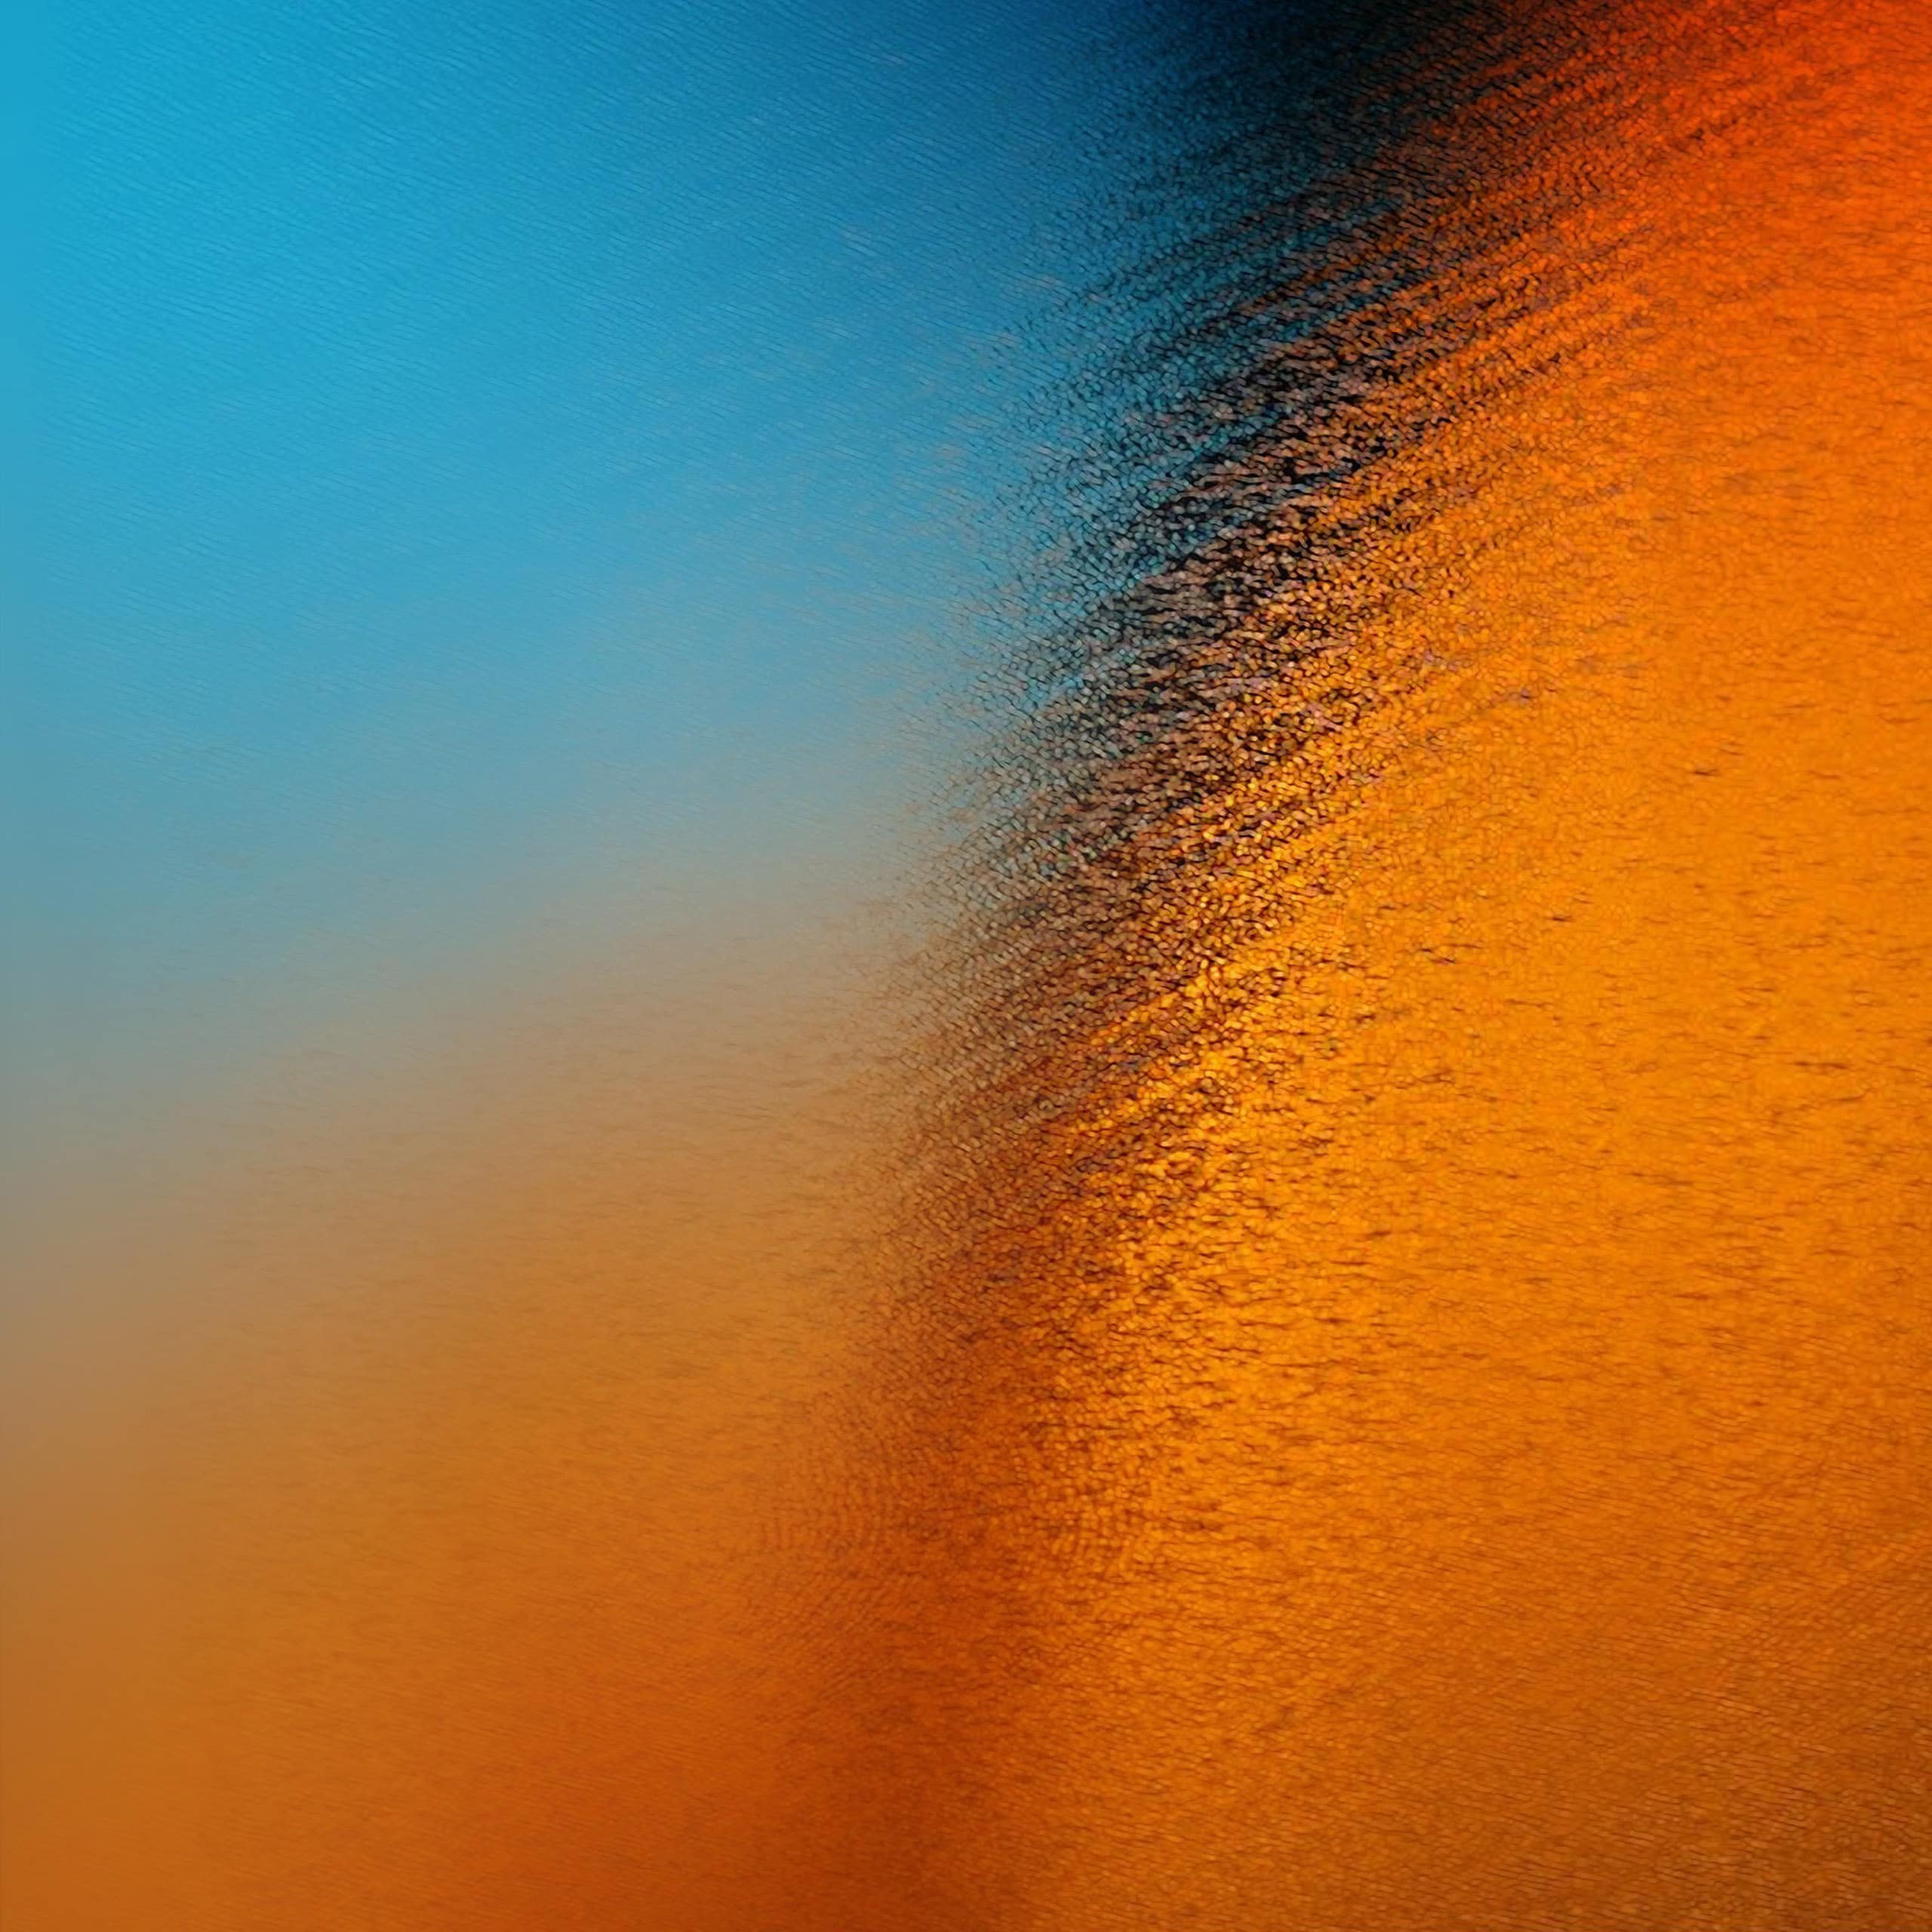 Samsung A20 Wallpapers